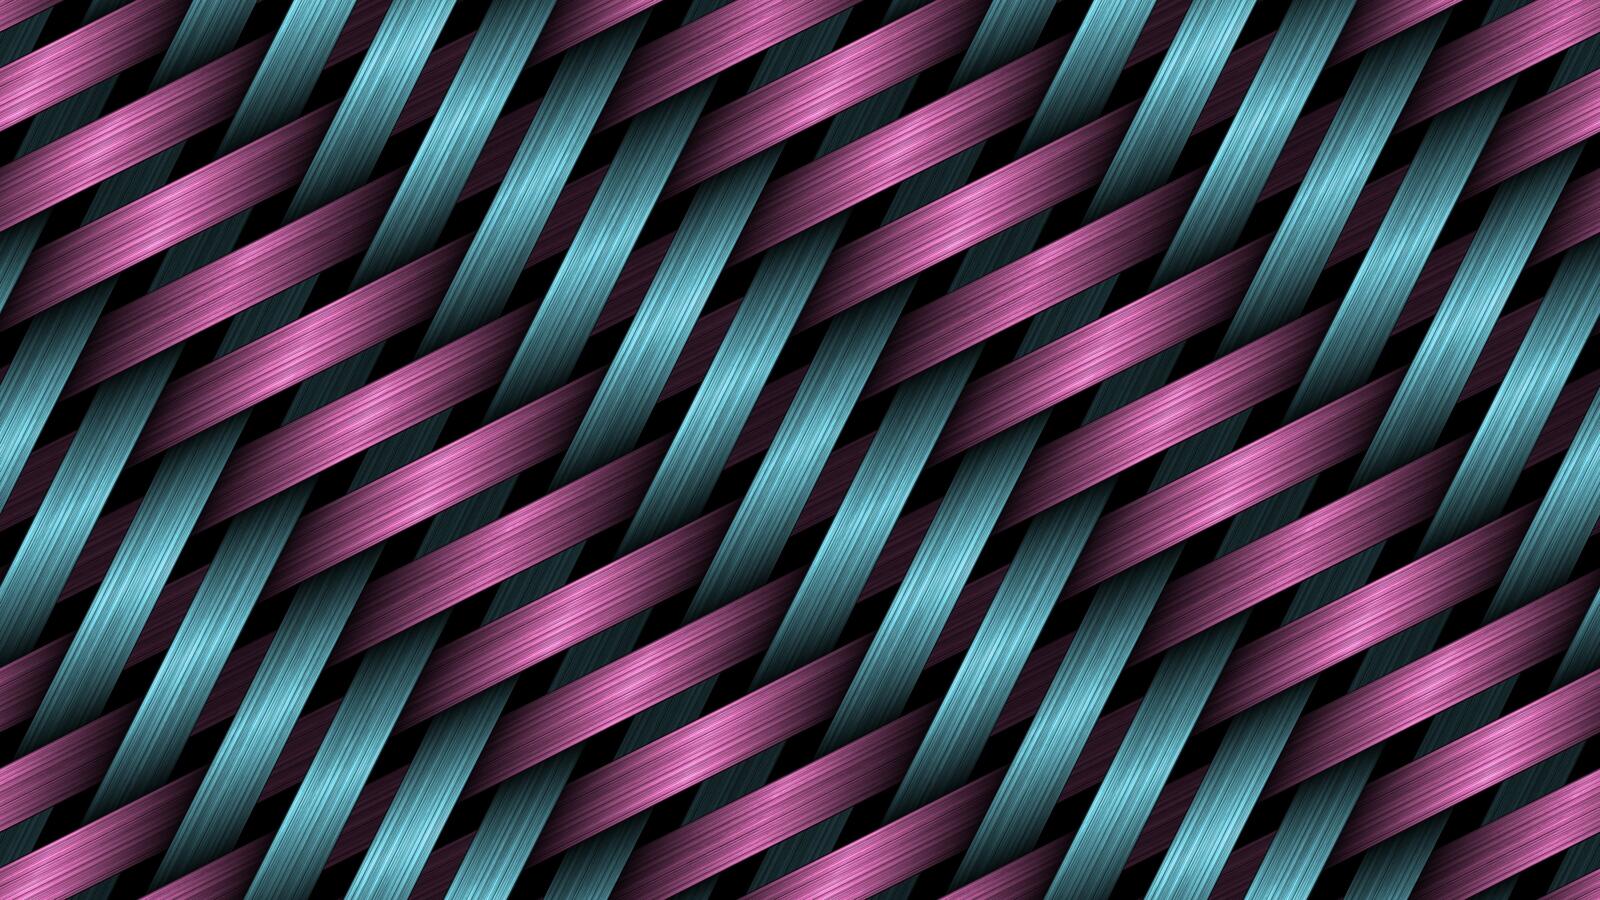 Wallpapers pattern illusion wallpaper nested lines on the desktop